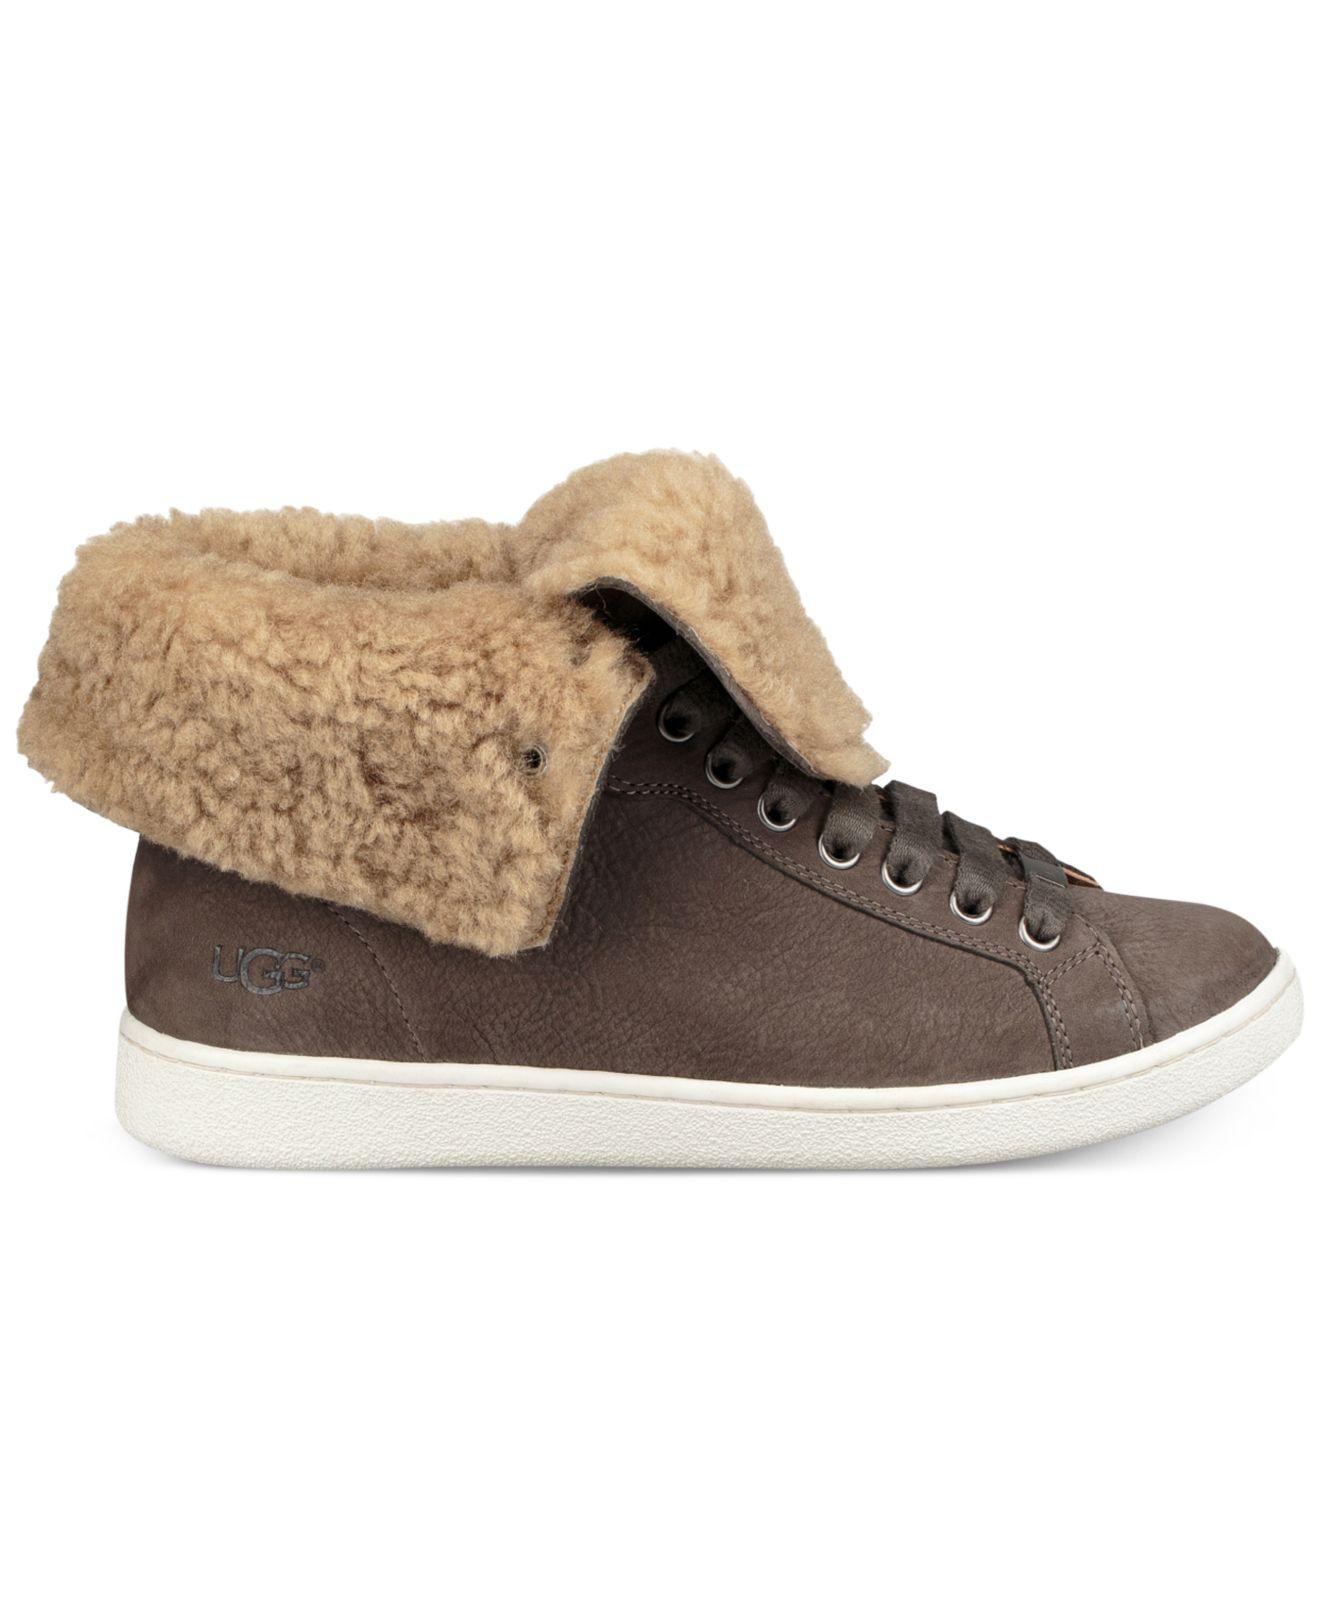 UGG Fur Starlyn High-top Lace-up Sneaker in Brown - Lyst